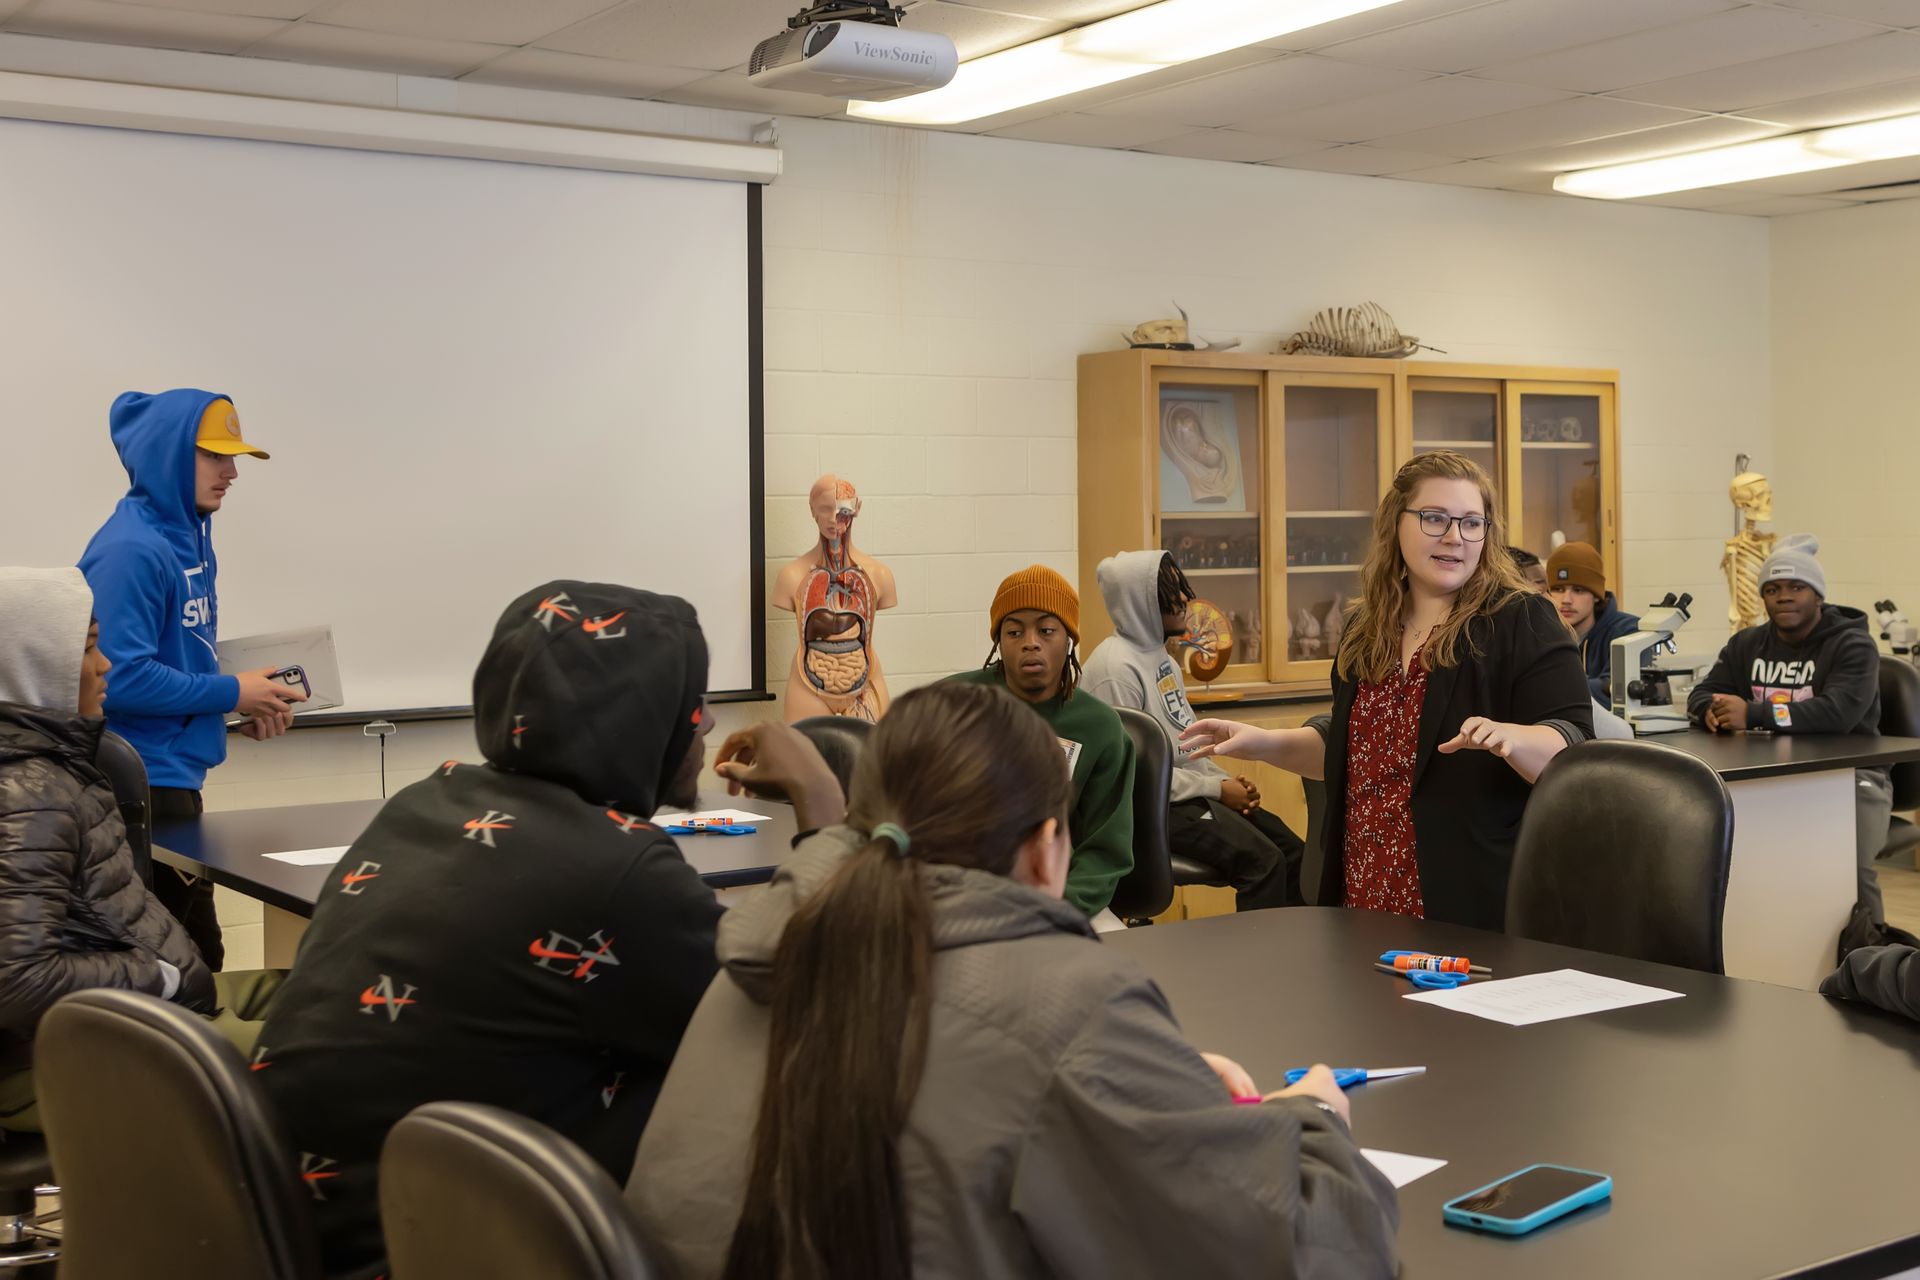 Assistant Professor Danielle Loder teaches students in Nelsons Science Center Classroom